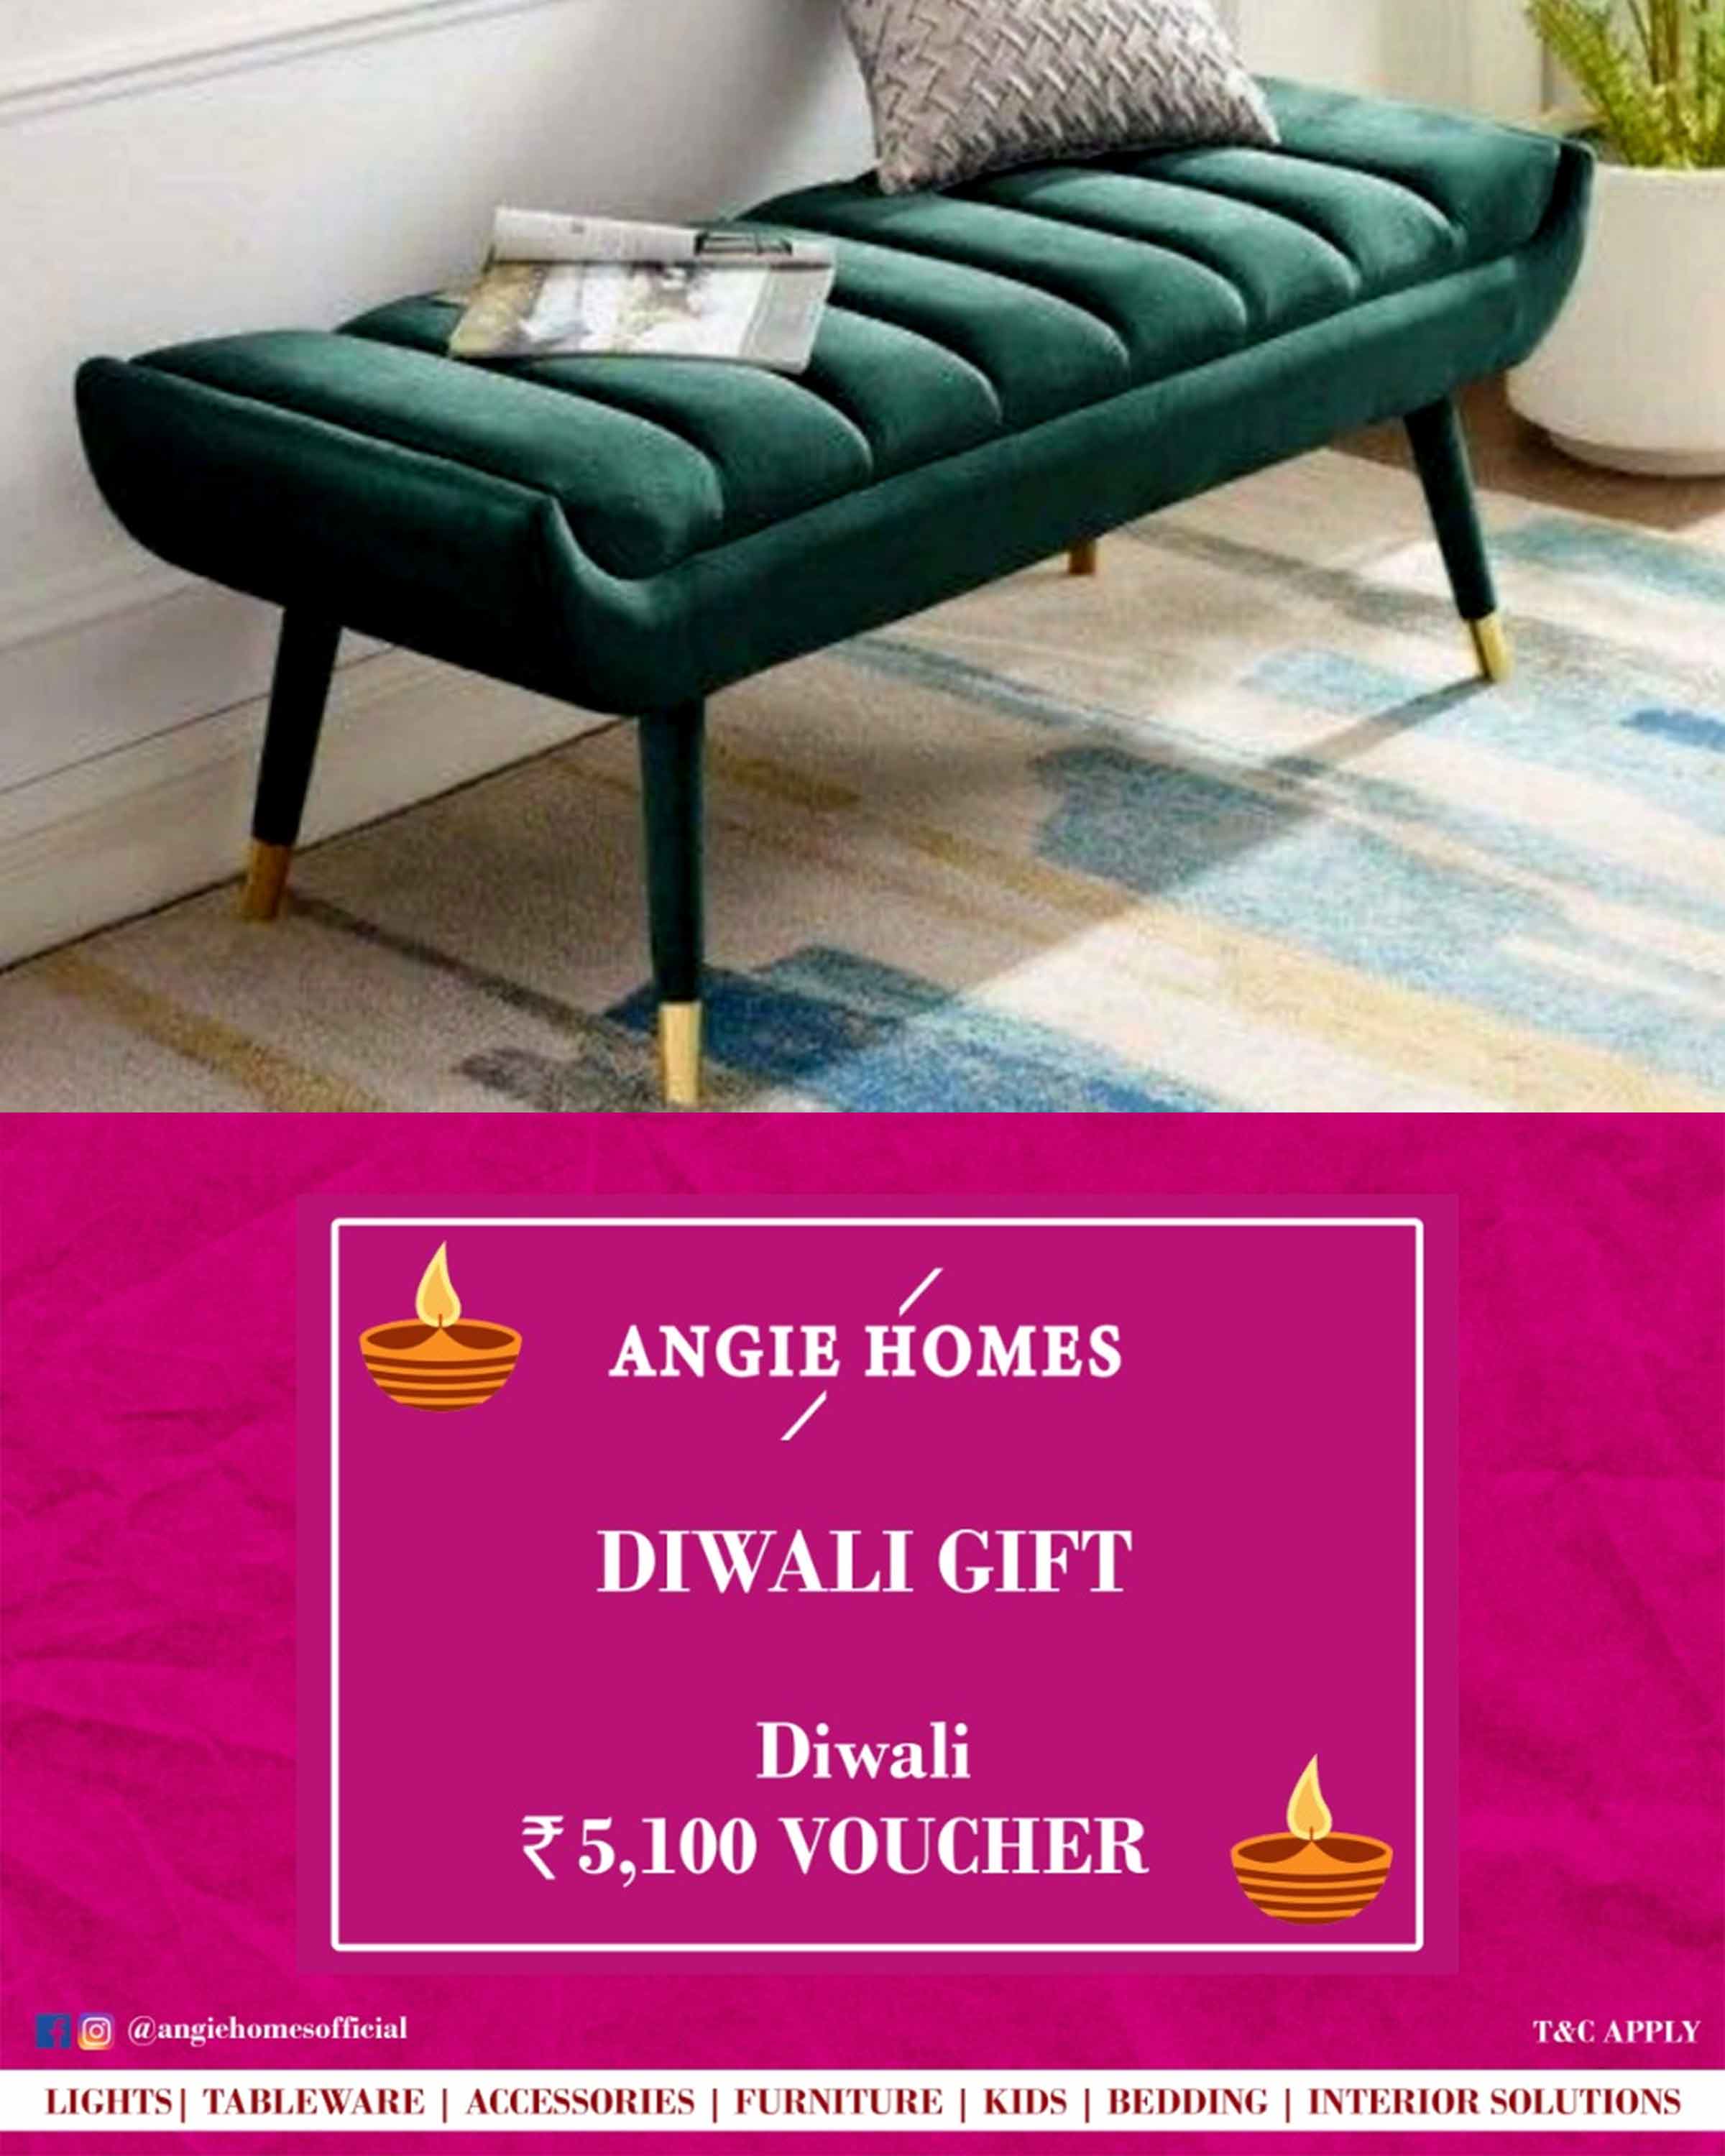 Online Diwali Gift Card Voucher for Luxury Benches | Furniture ANGIE HOMES